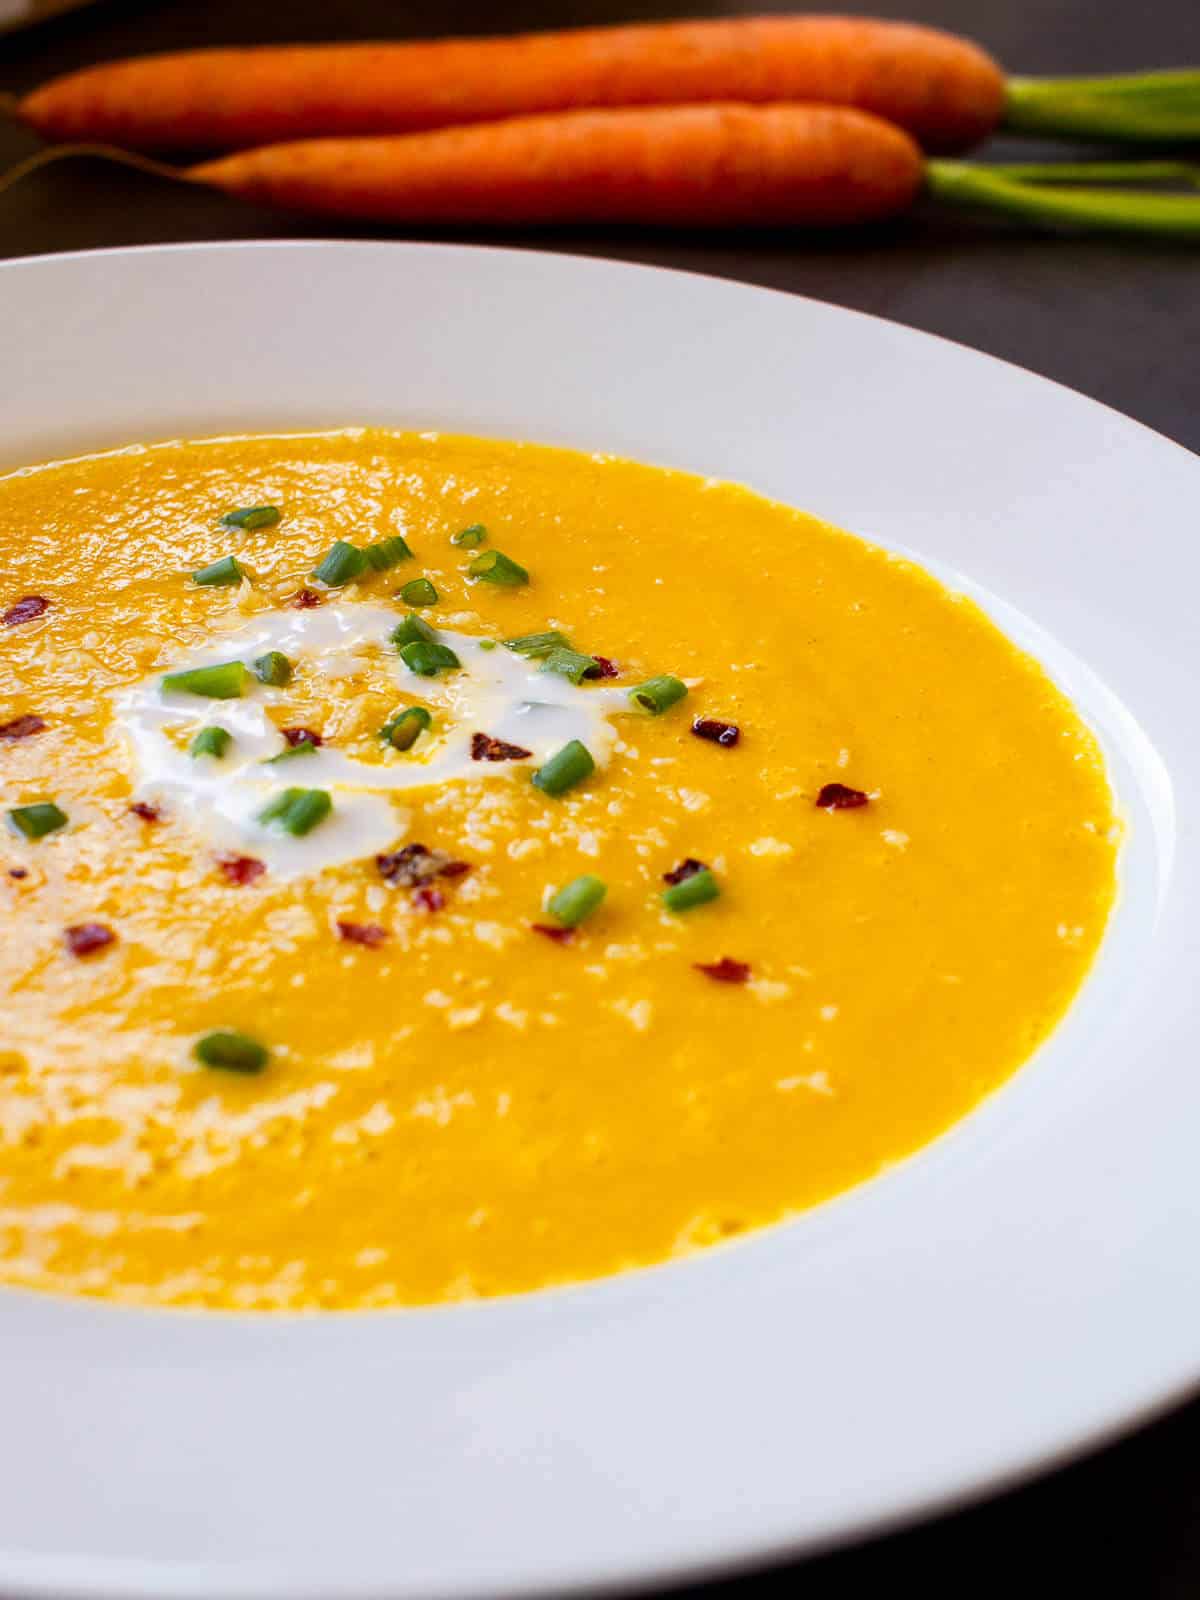 carrot and ginger soup coconut milk plate garnished with coconut milk and red pepper flakes.